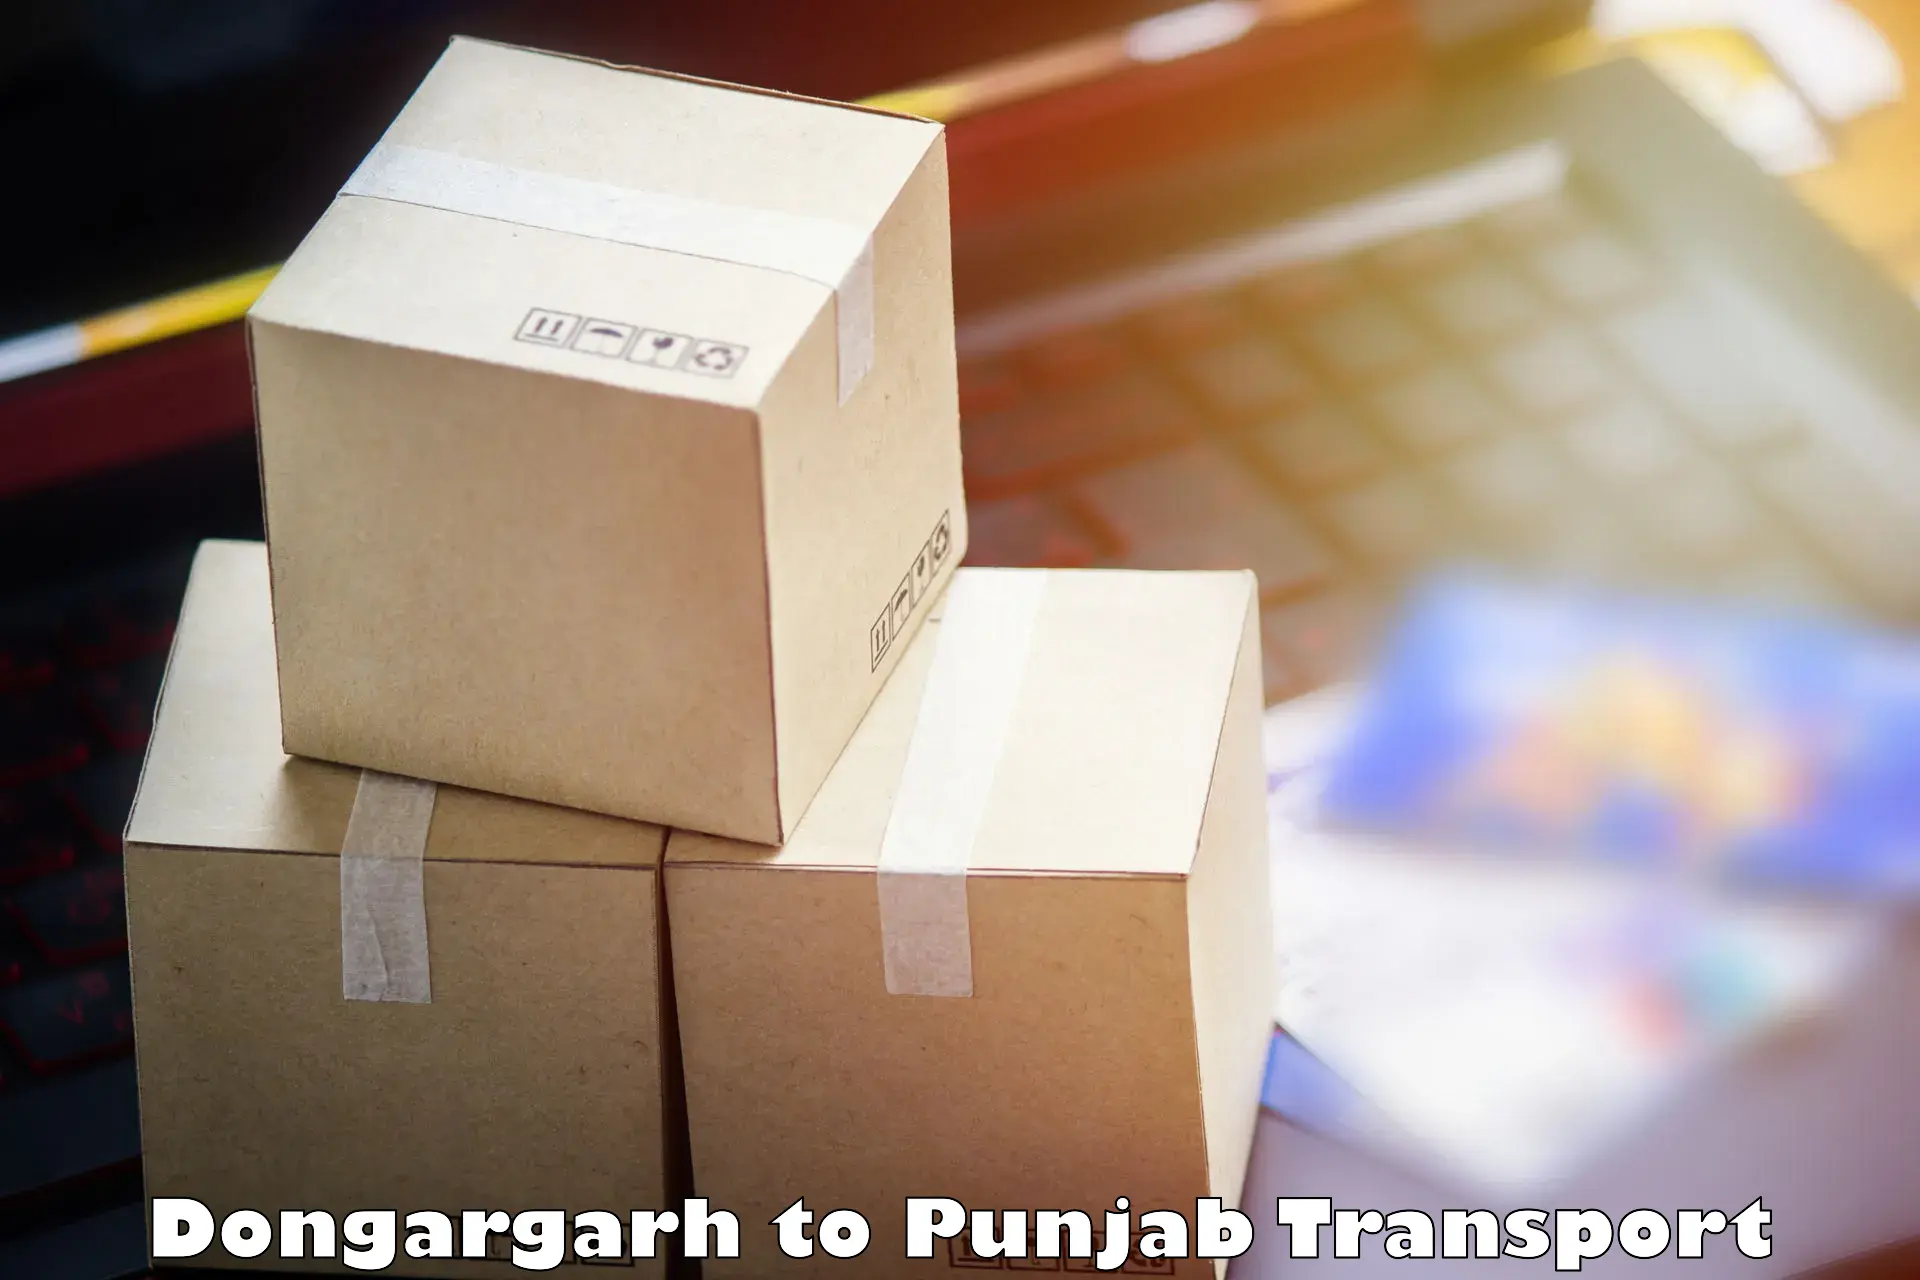 India truck logistics services Dongargarh to Amritsar